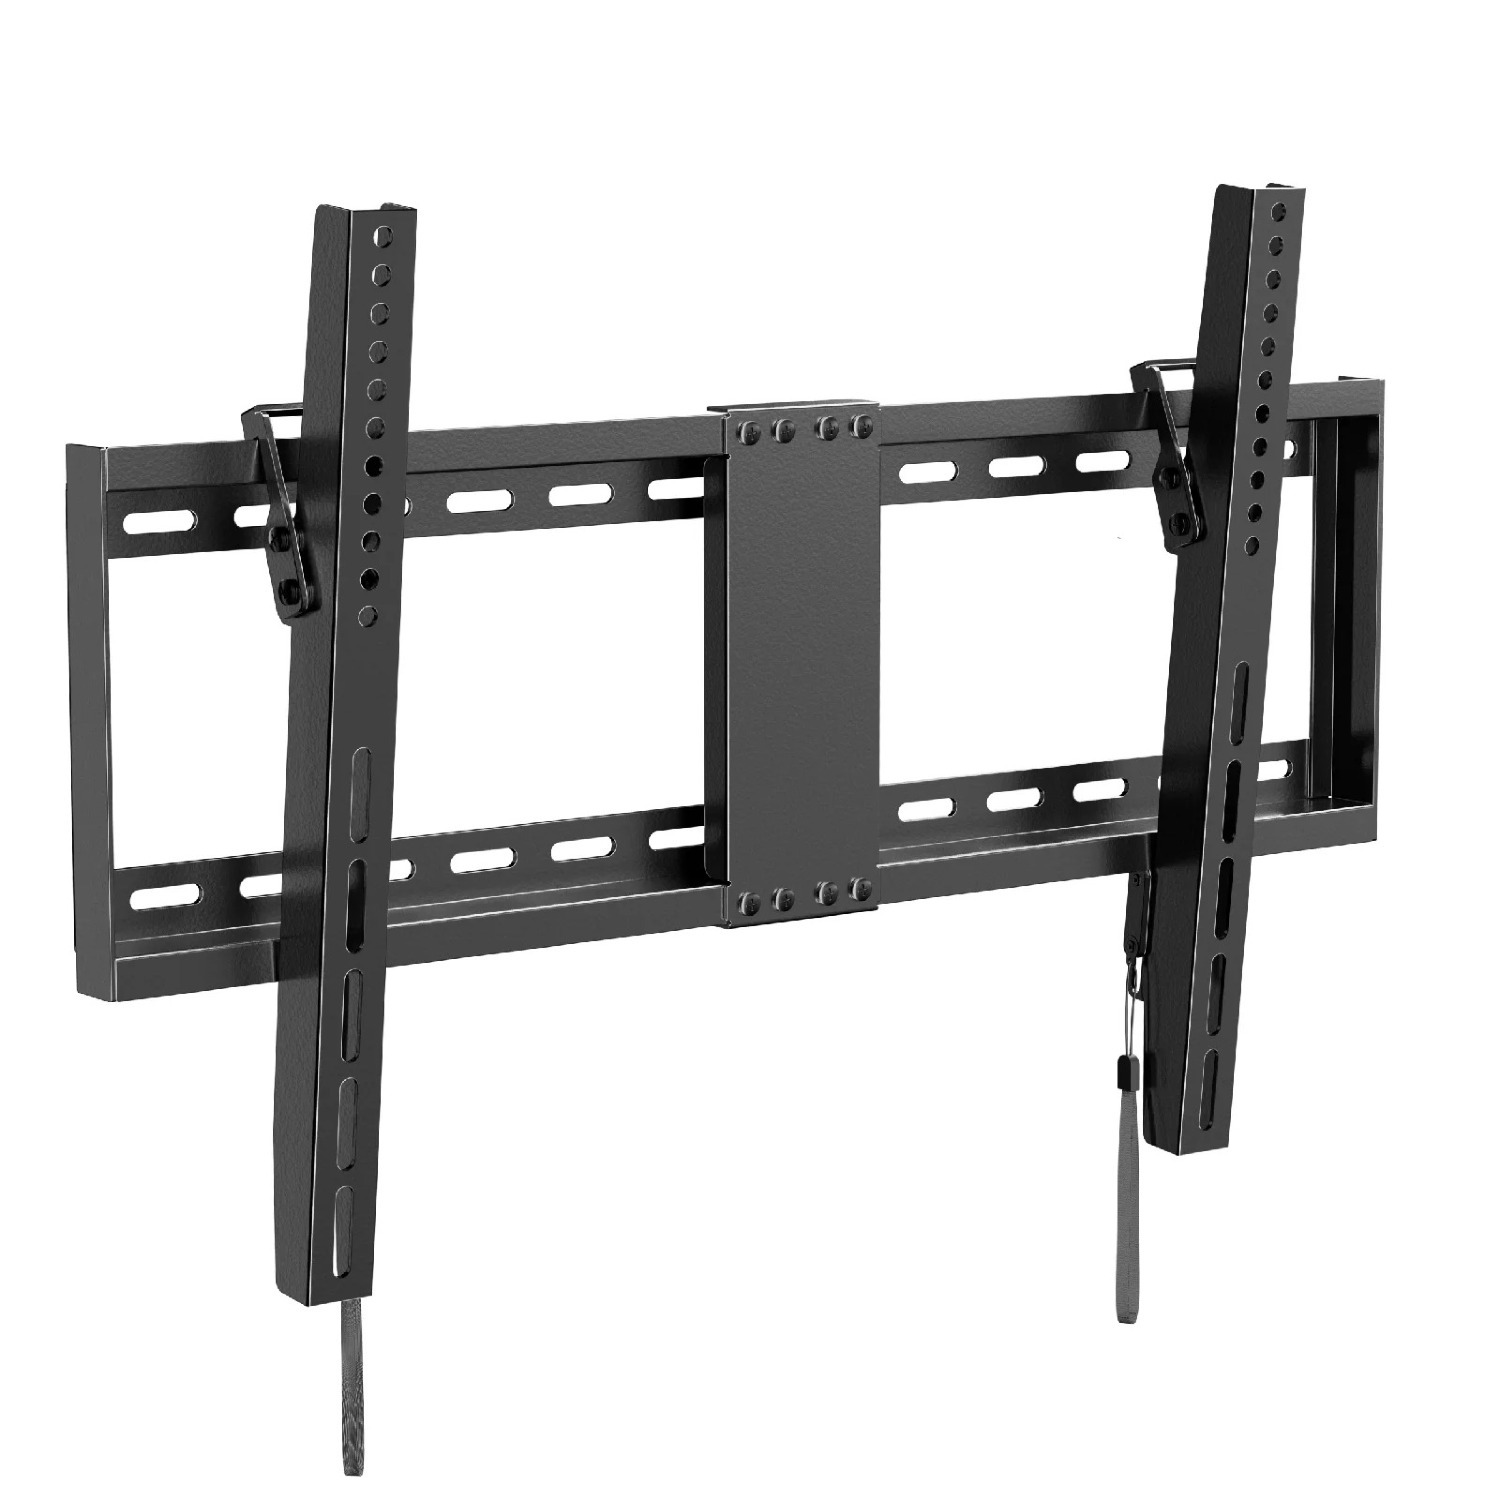 PERLESMITH Fixed Tilting TV Wall Mount for 32-82" TVs $12.99 + Free Shipping w/Walmart + or $35+